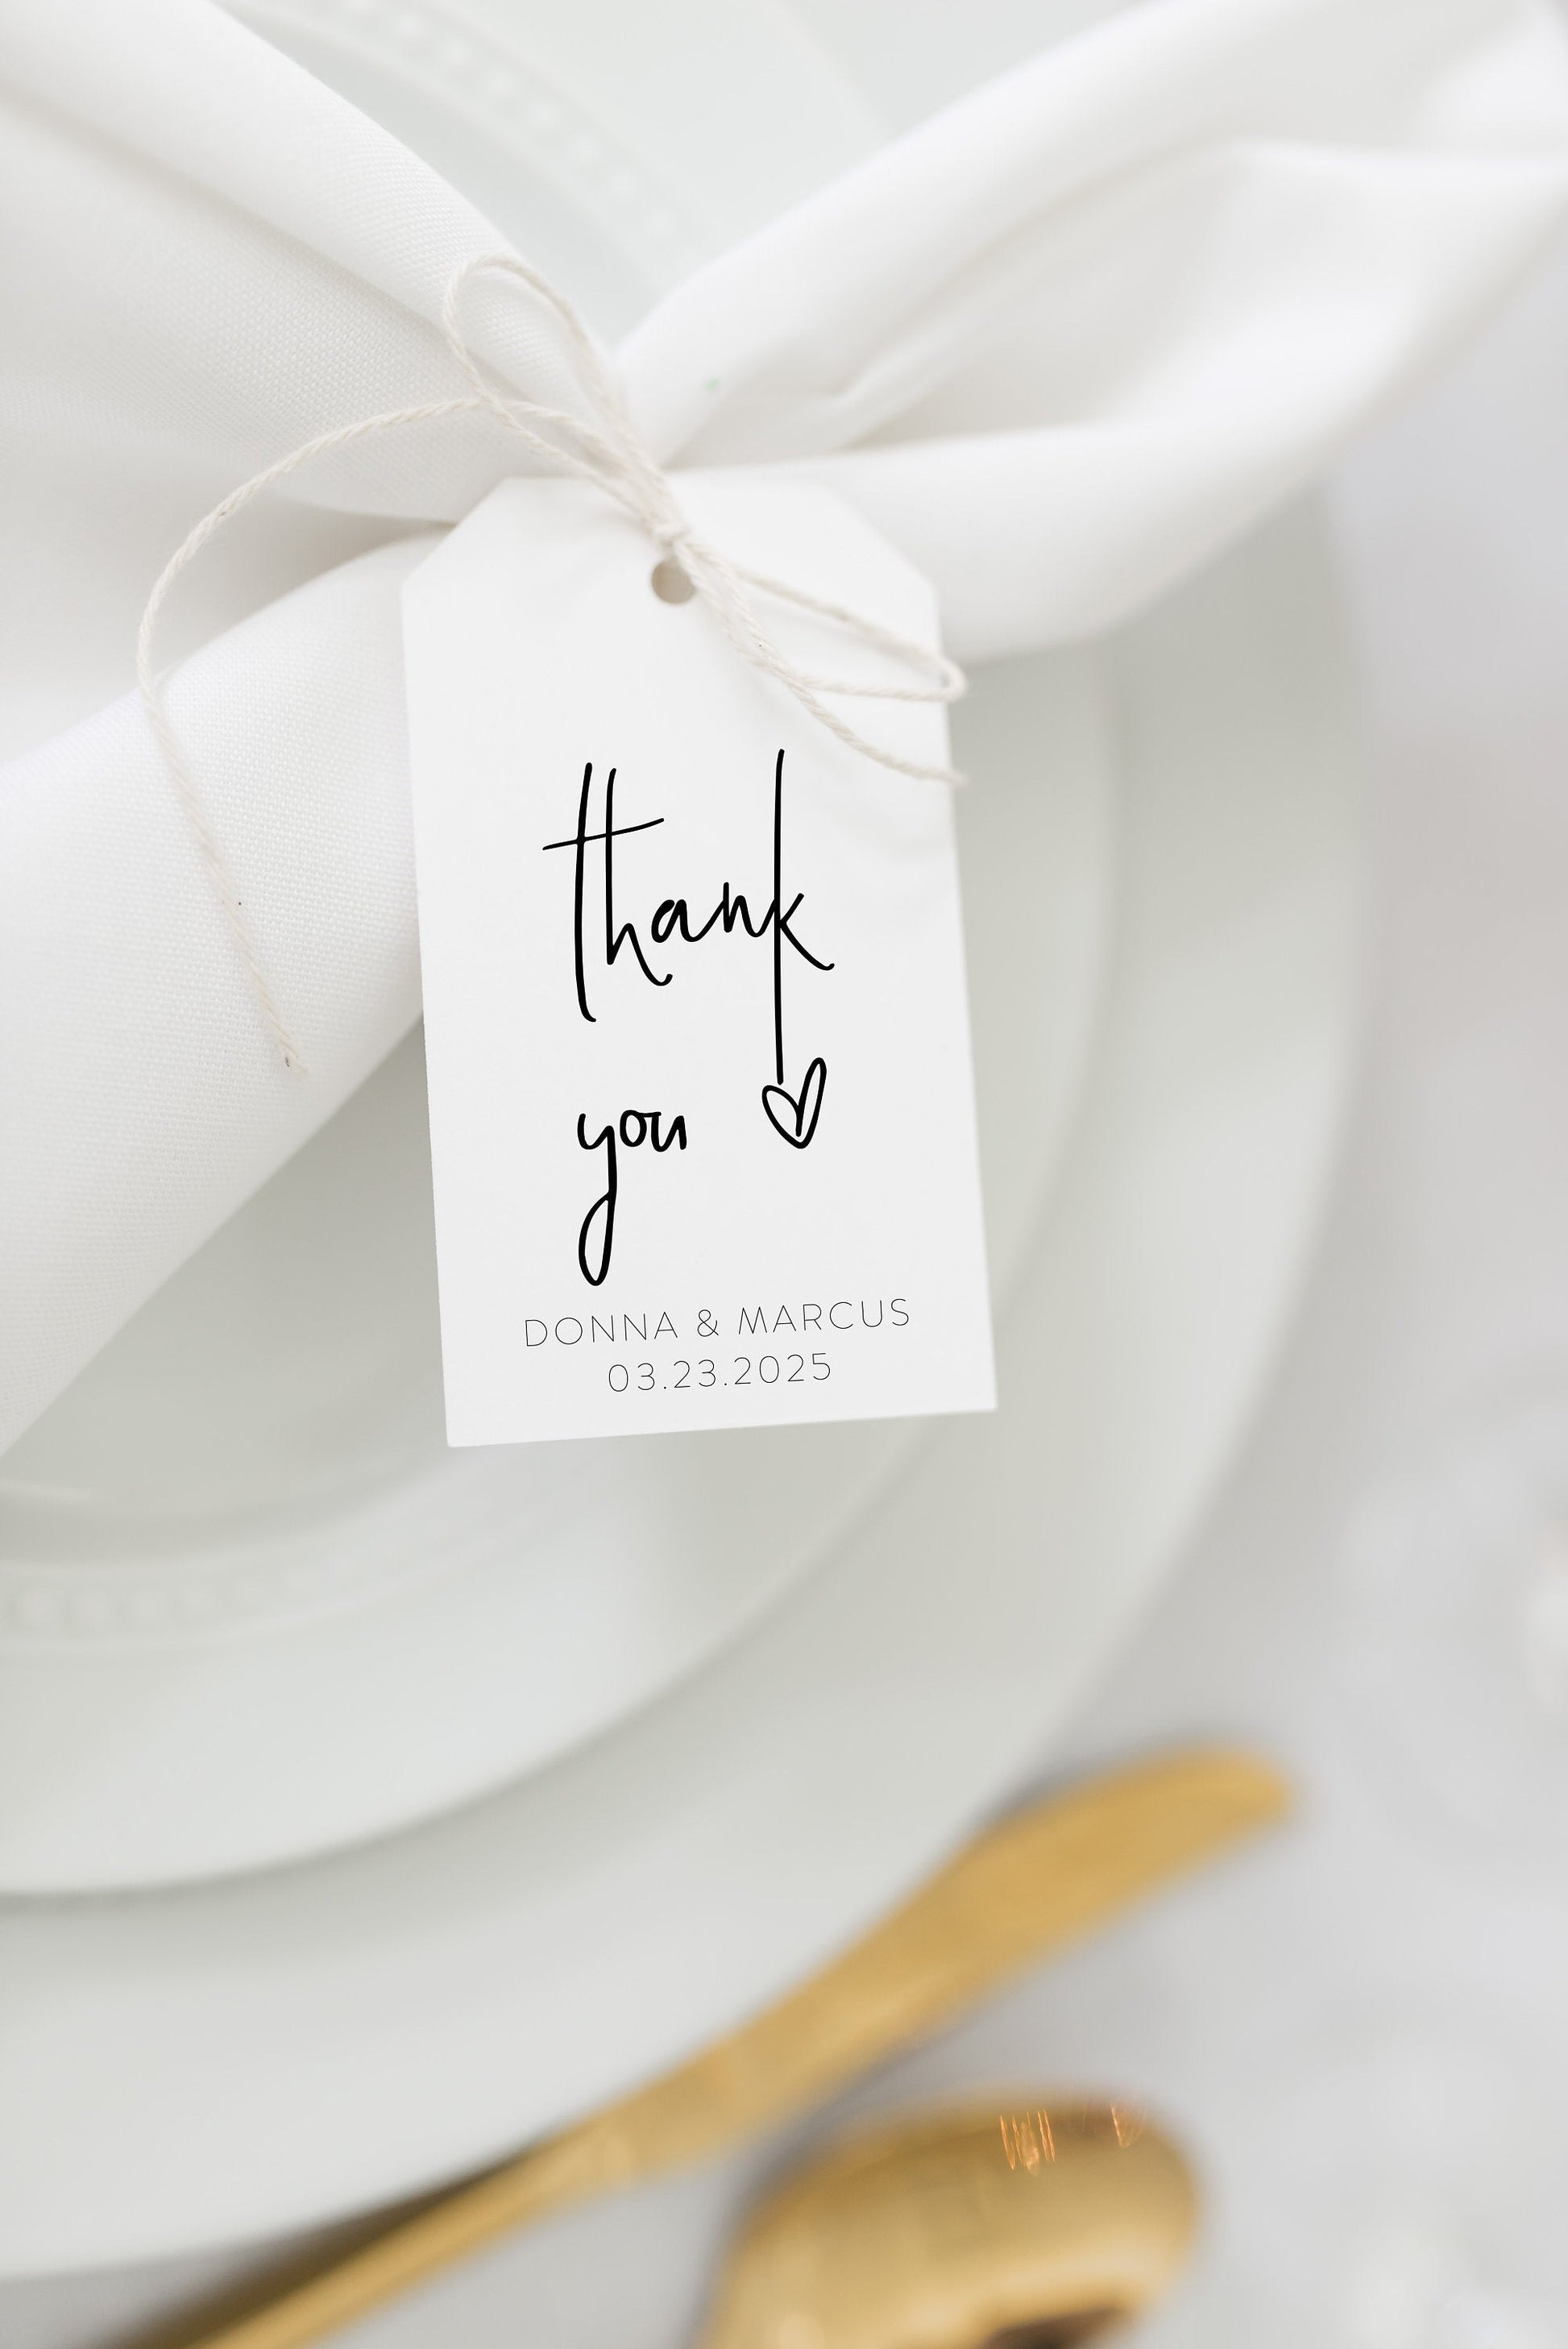 Printable Thank You Tags Template Wedding Bridal Shower Instant Download 100% Editable- DONNA TAGS | TY | INSERTS SAVVY PAPER CO